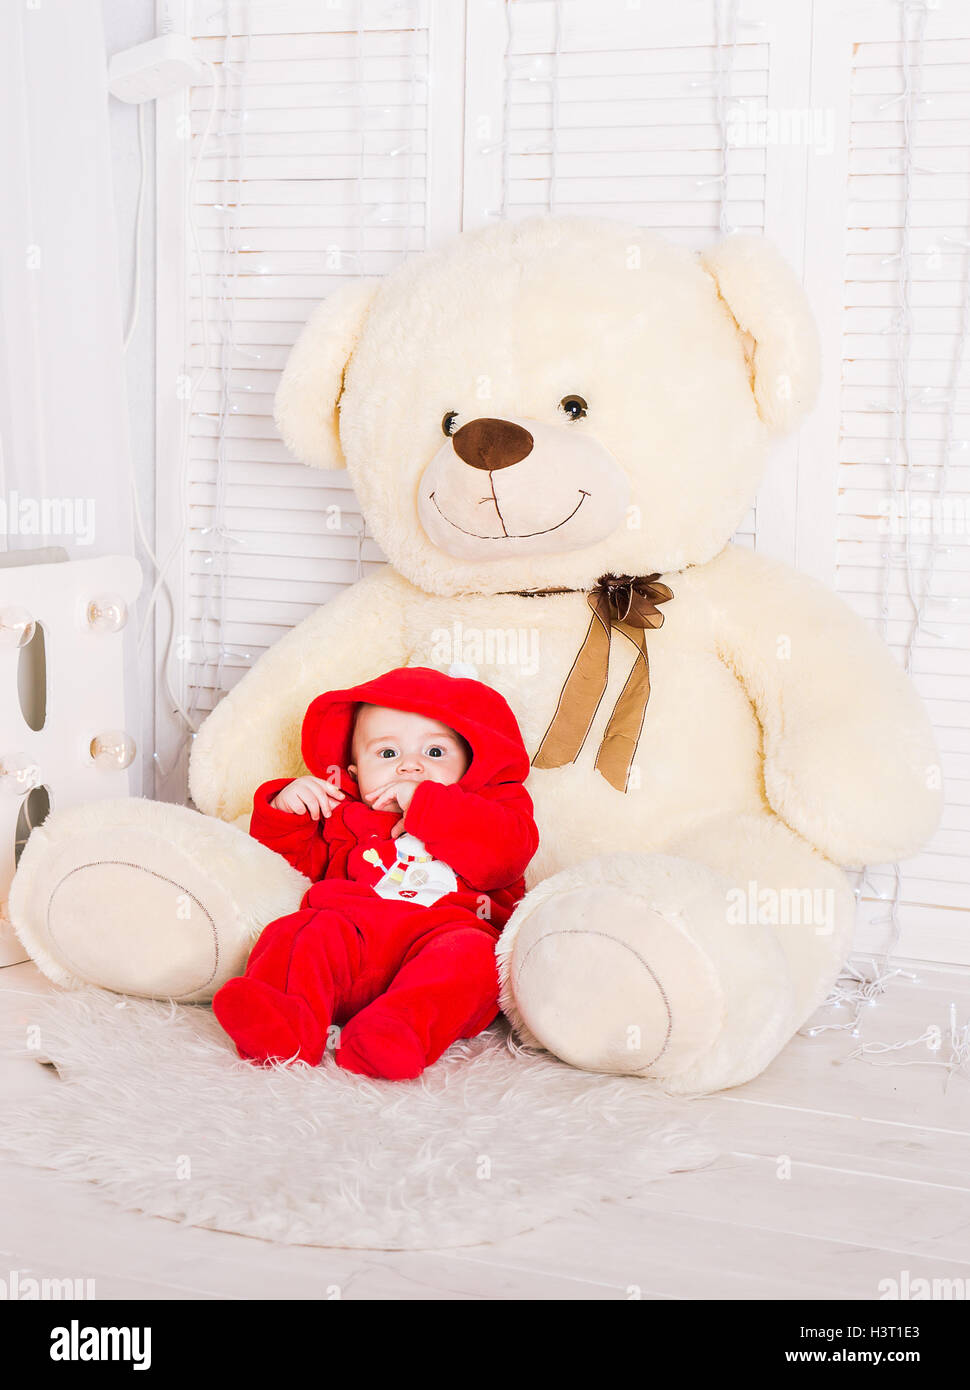 Cute baby with big teddy bear on white room Stock Photo - Alamy